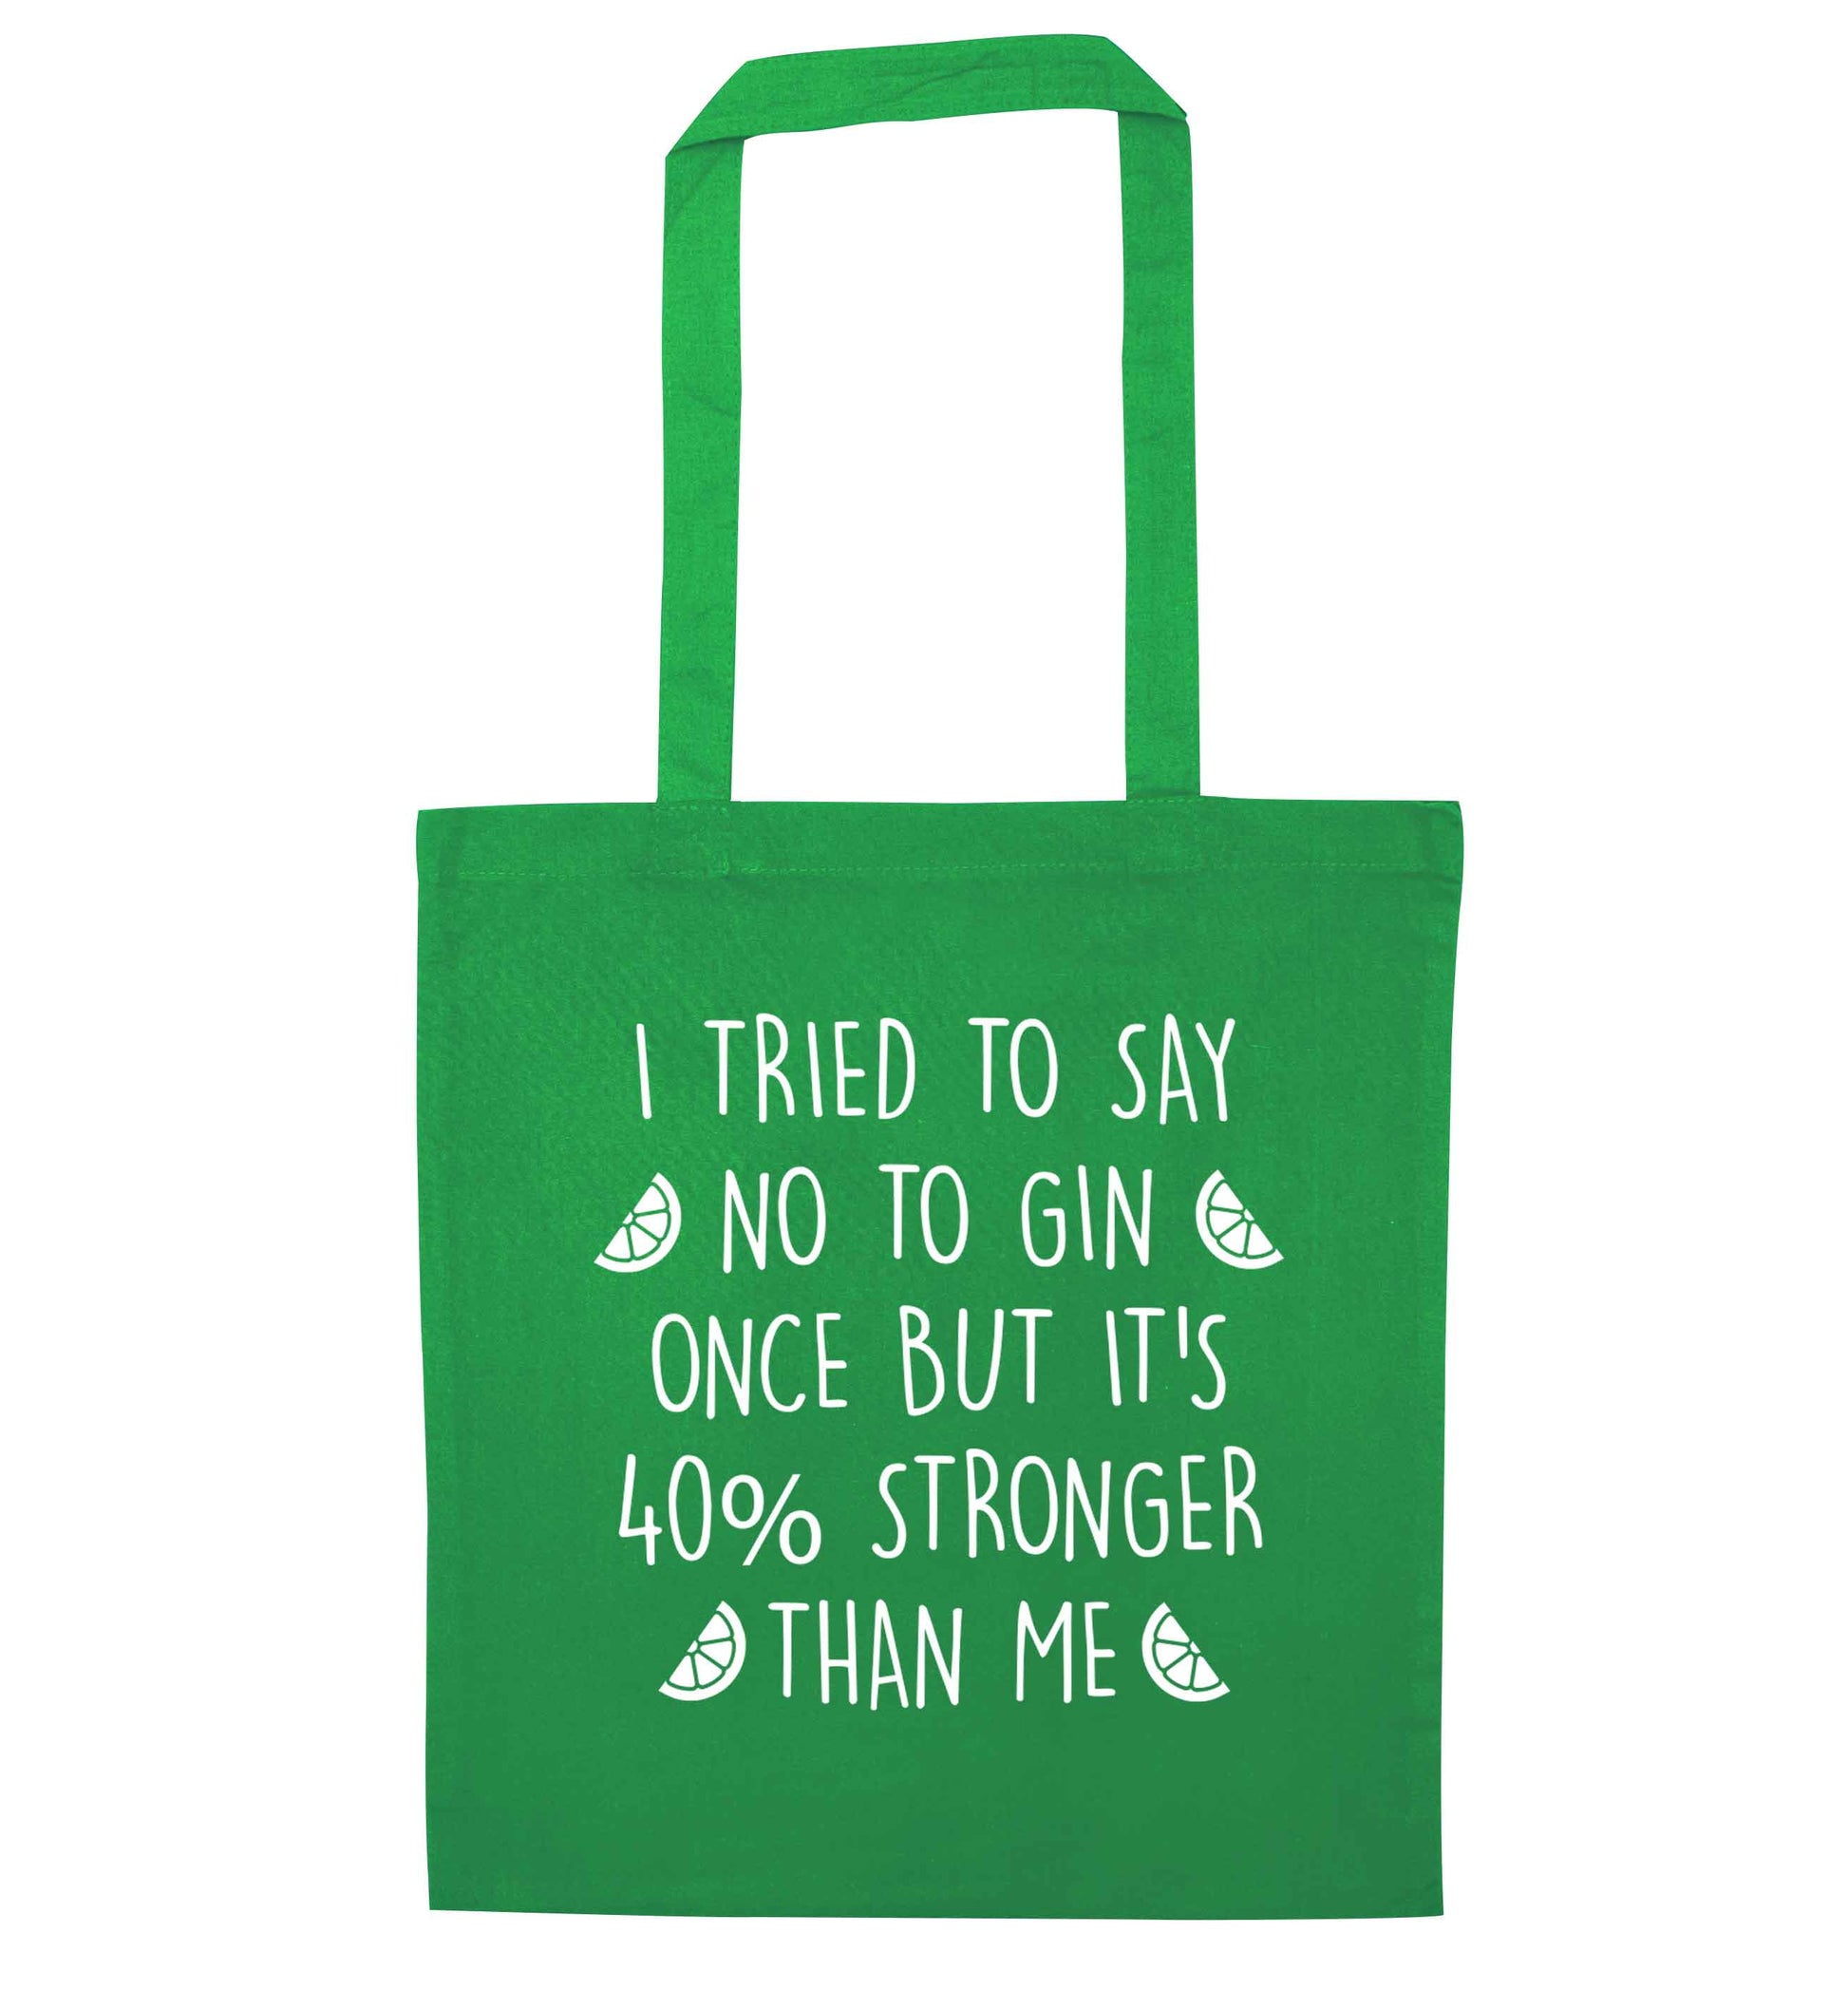 I tried to say no to gin once but it's 40% stronger than me green tote bag